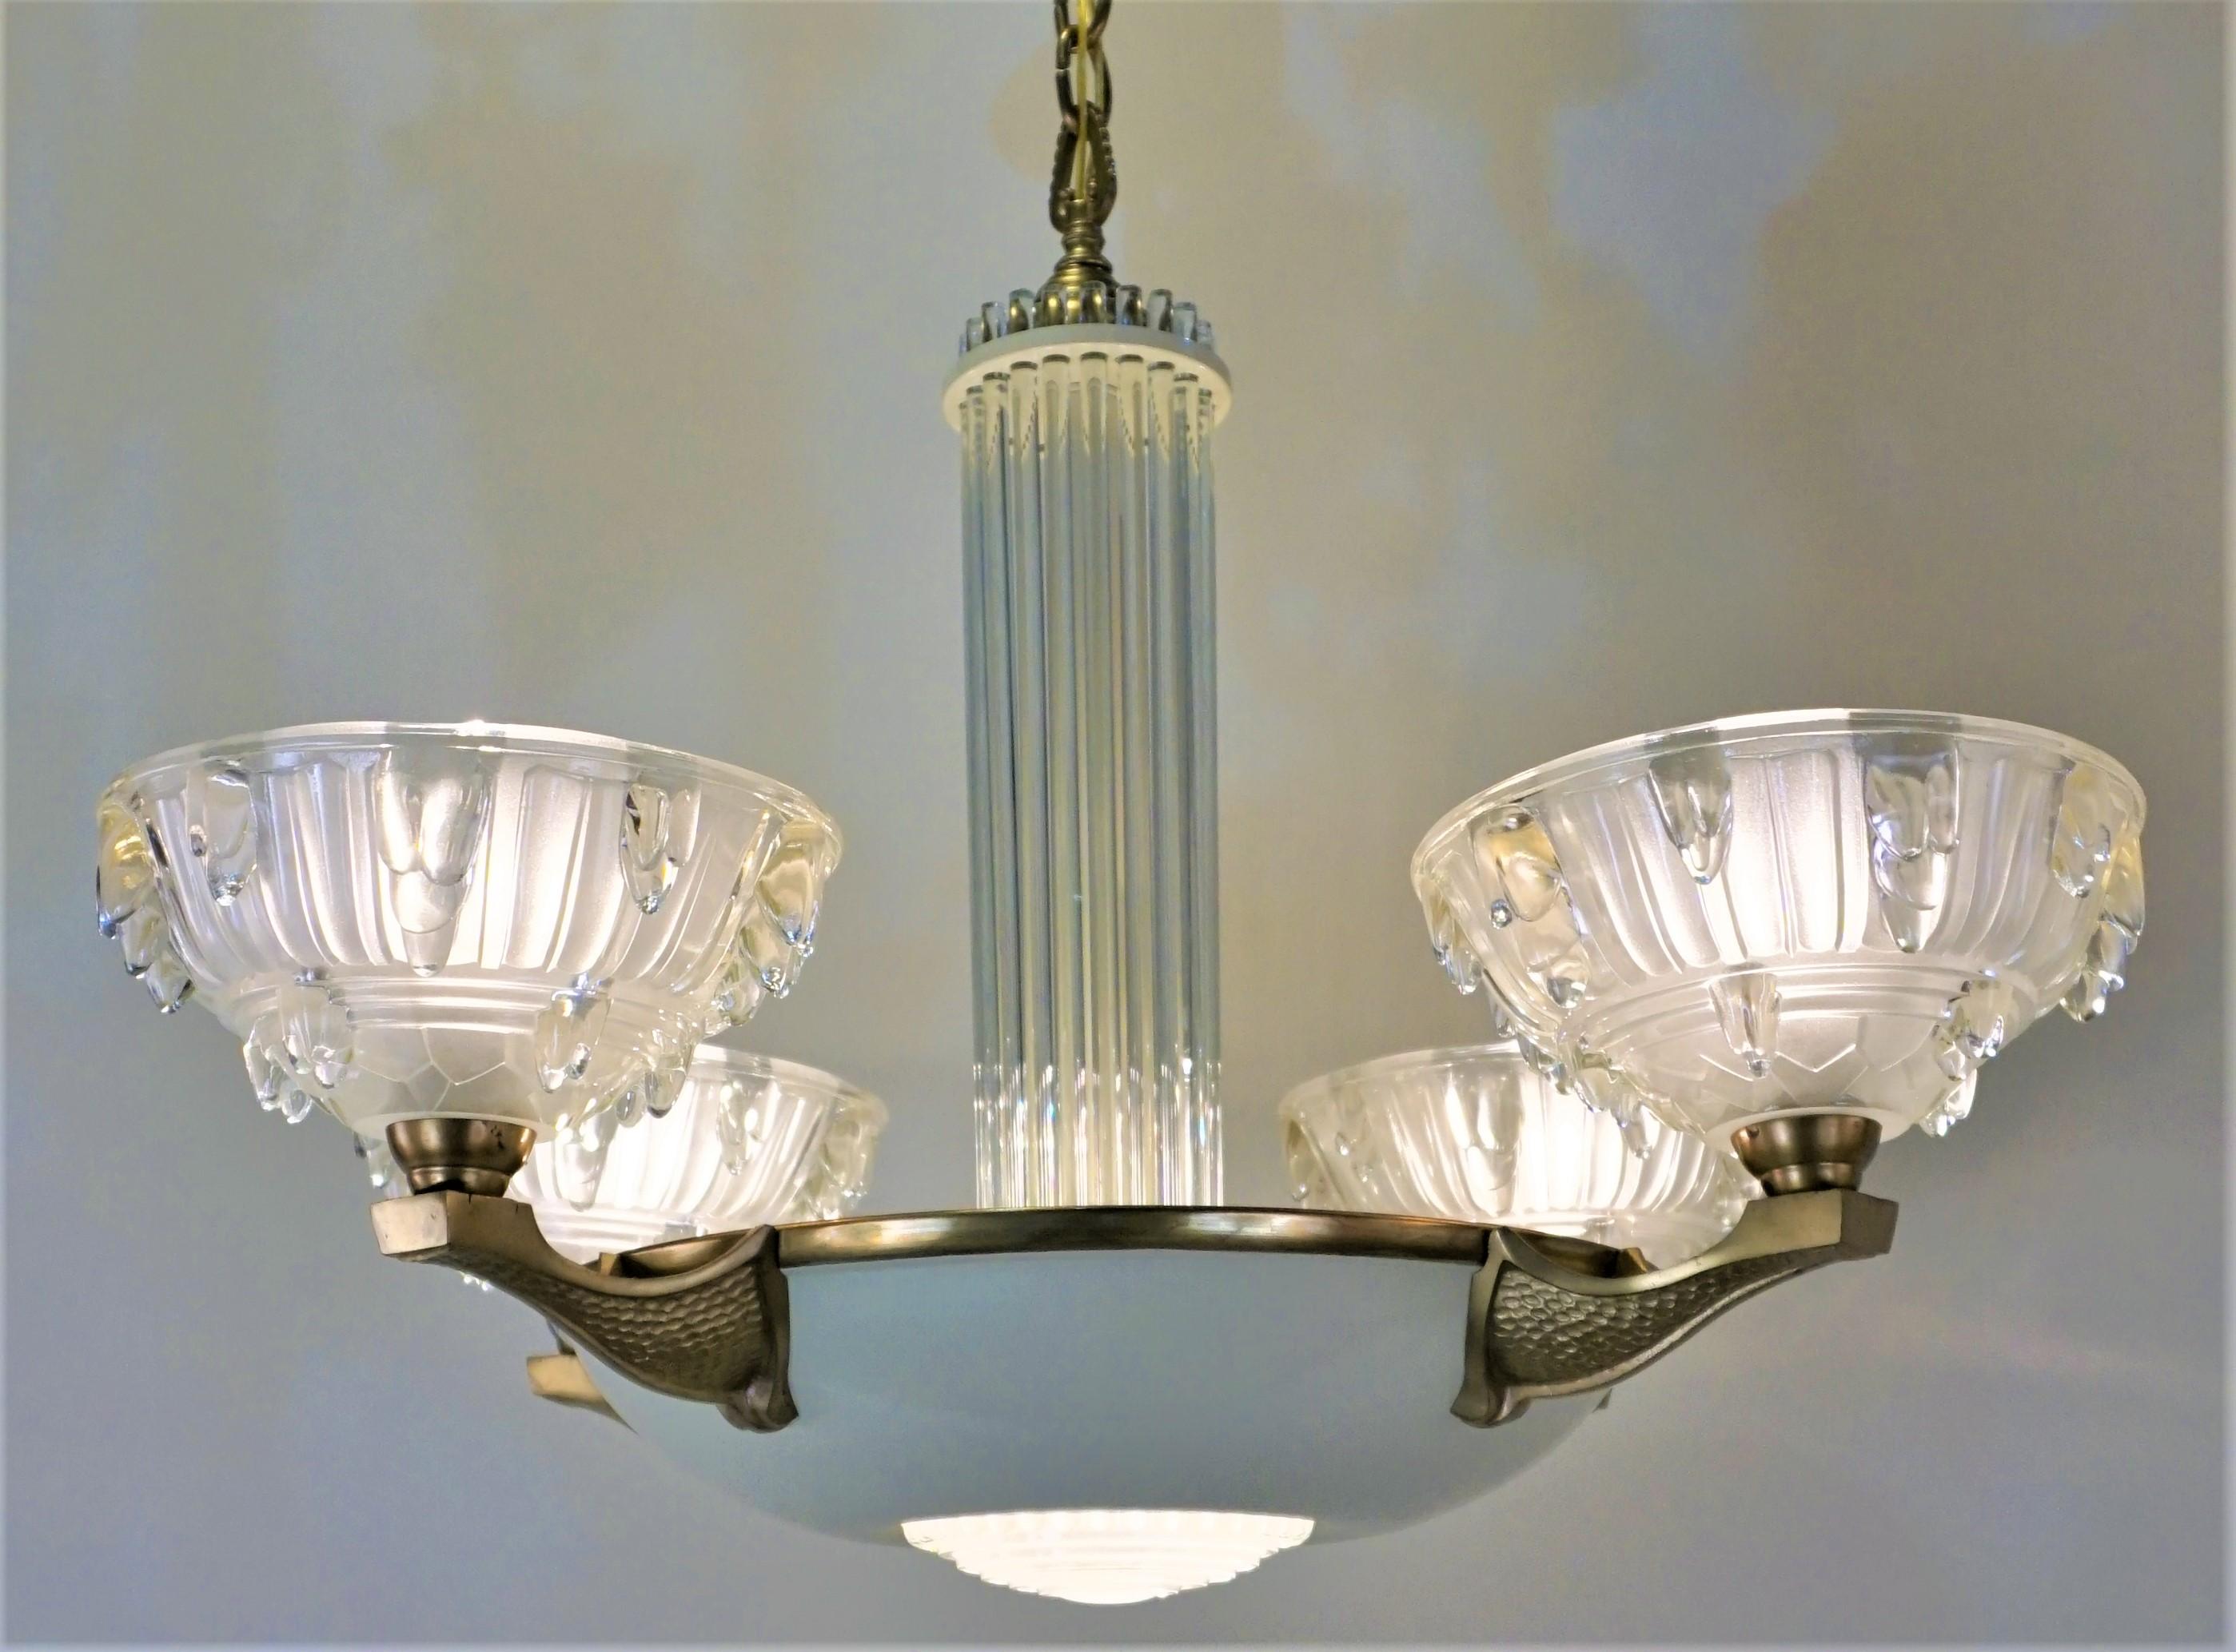 French Art Deco eight bronze chandelier with glass rod and molded glass shades.
The total height of this chandelier with all the chain is 43